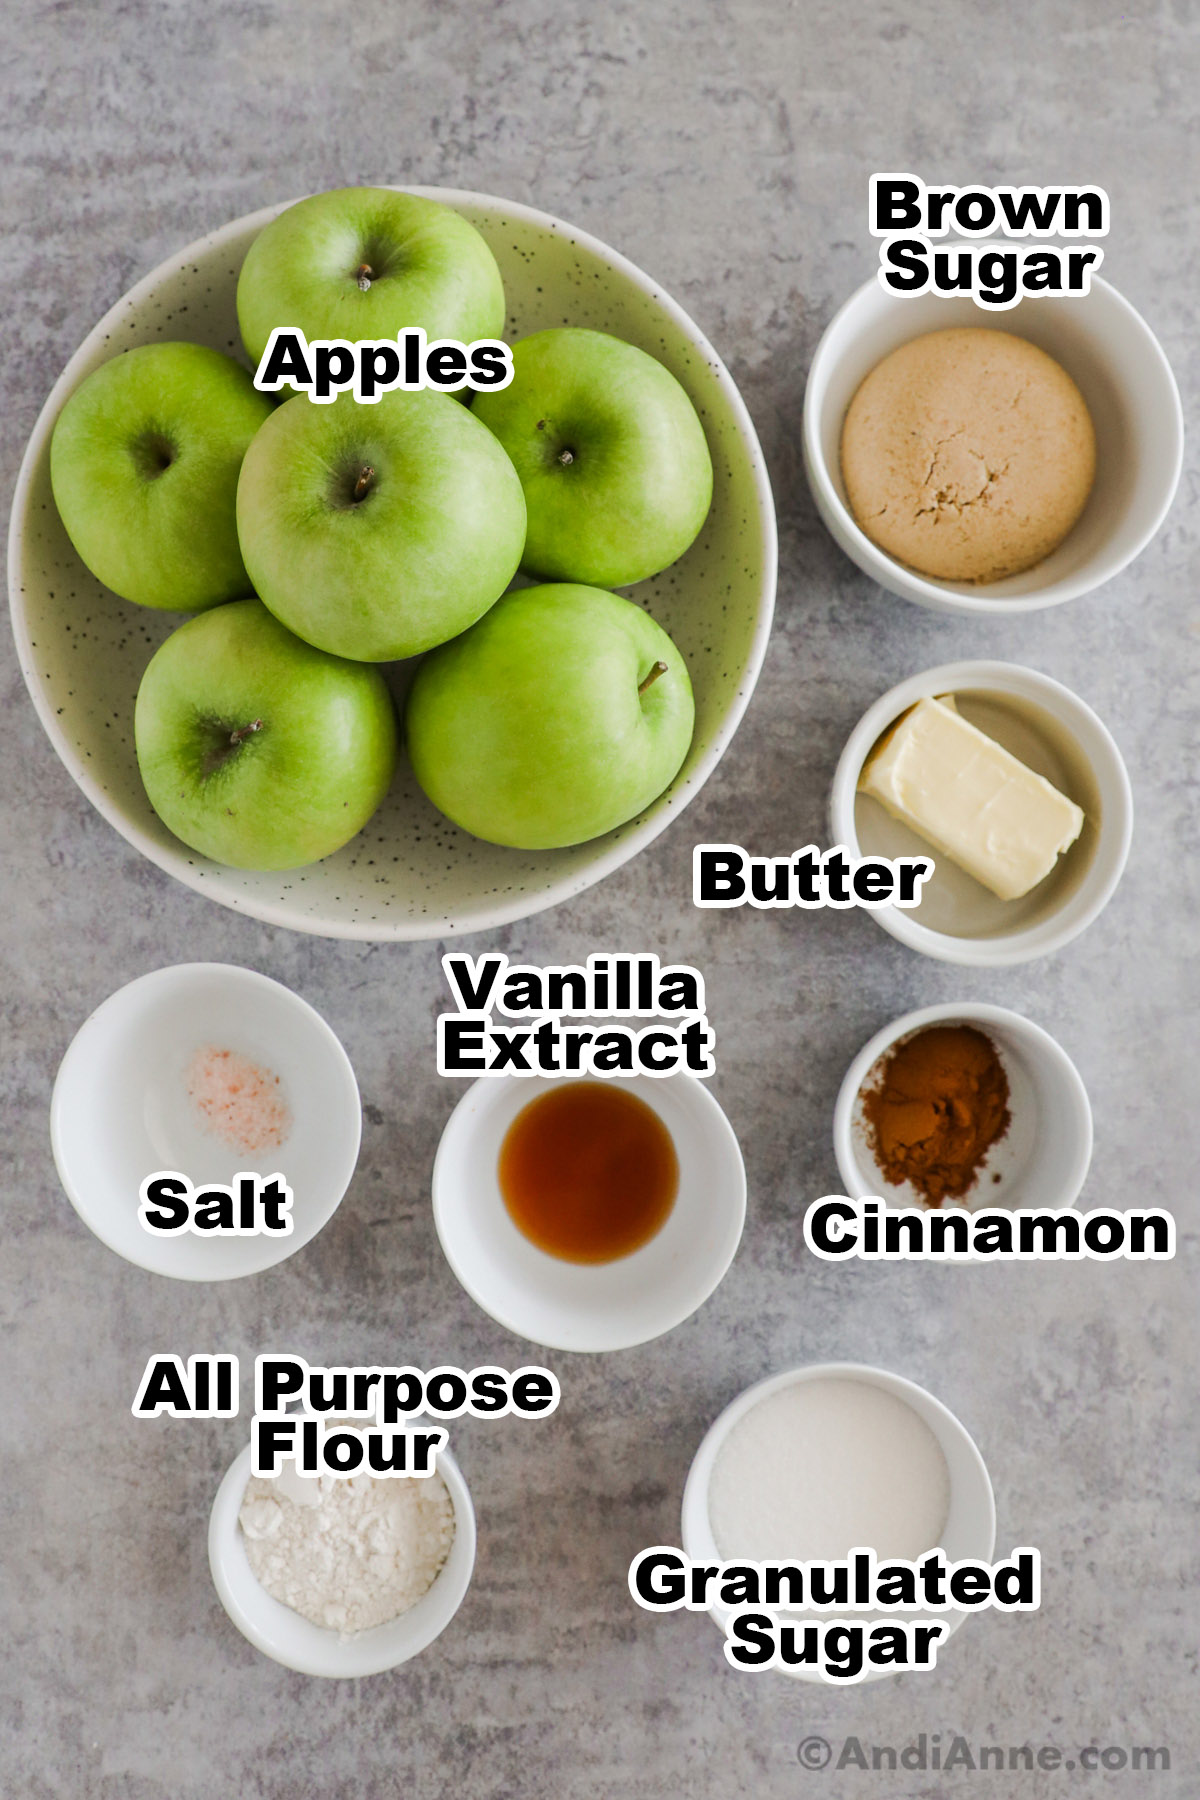 Recipe ingredients including bowl of granny smith apples, bowls of brown sugar, butter, flour, cinnamon, vanilla extract, salt, and granulated sugar.